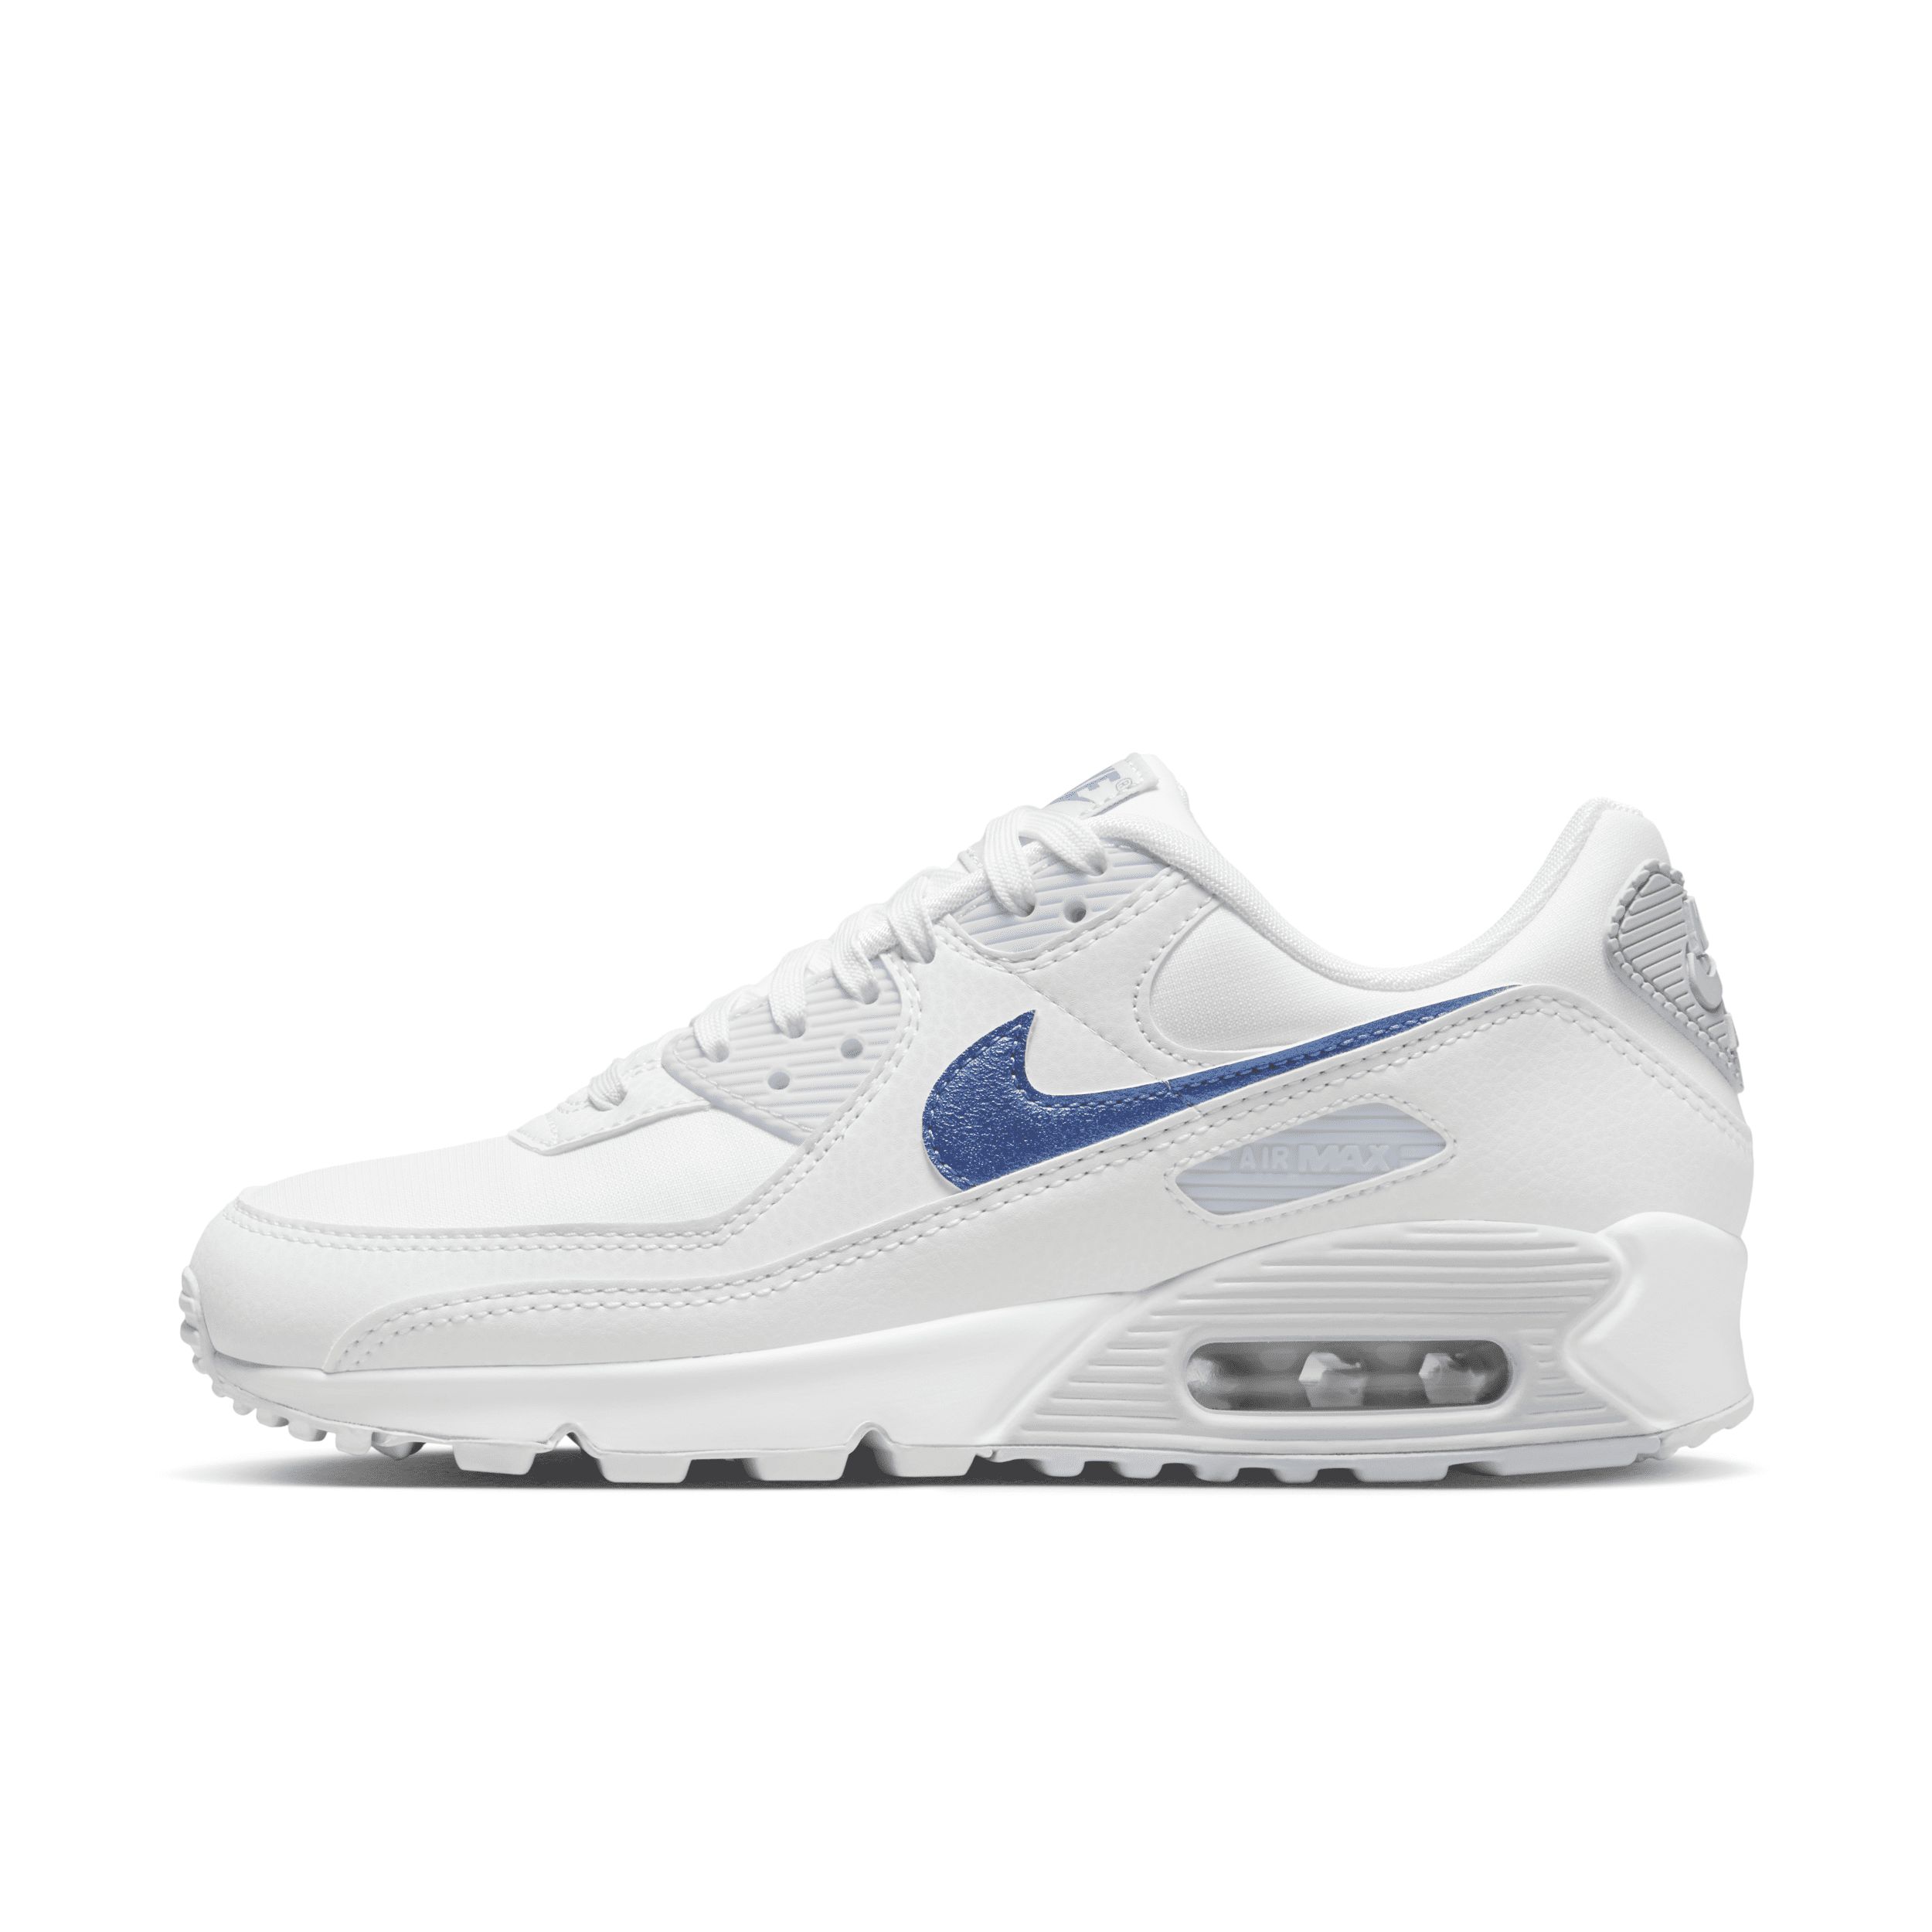 Nike Women's Air Max 90 Shoes in White, Size: 8 | DX0115-100 | Nike (US)